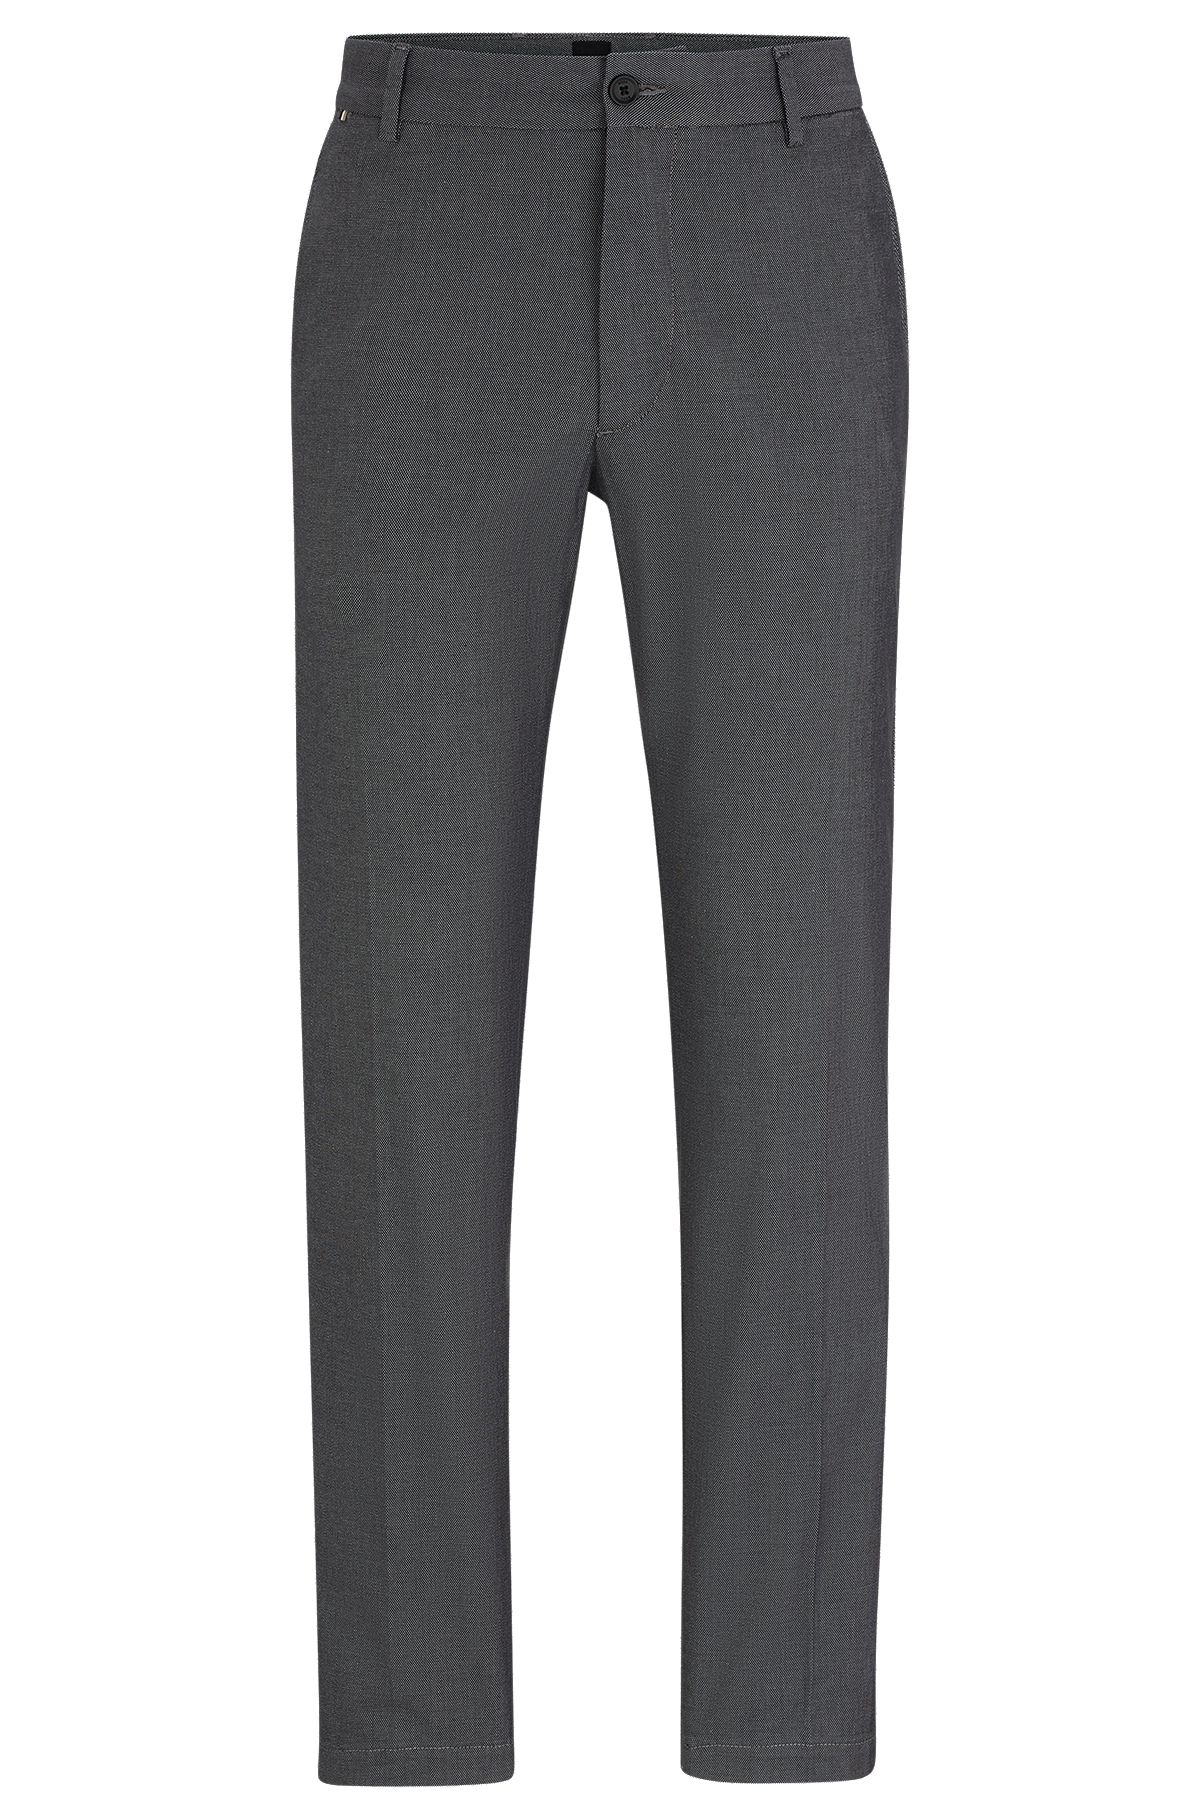 Regular-fit trousers in patterned stretch cotton, Dark Blue